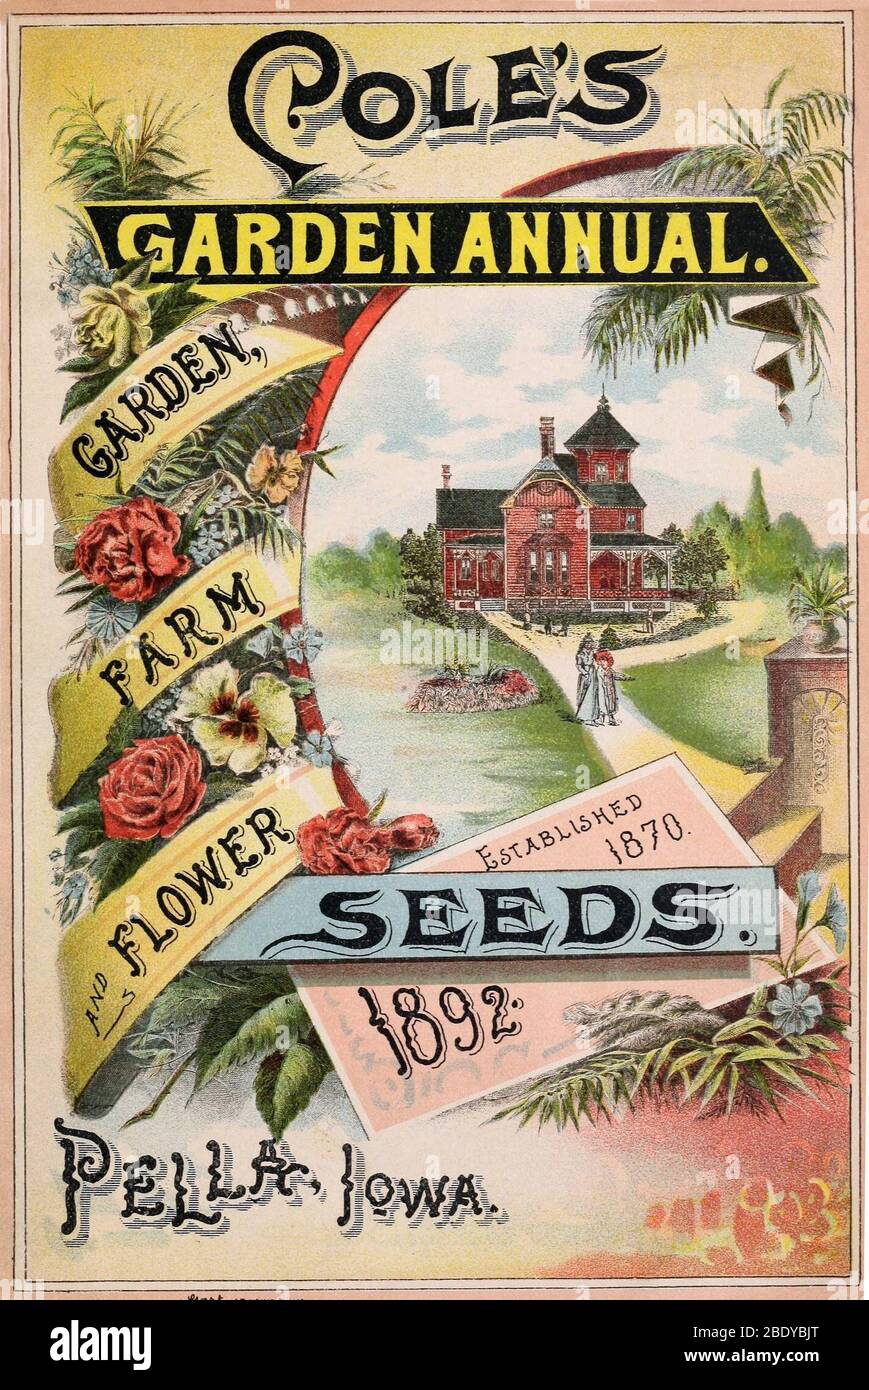 Cole's Seeds, Garden Annual, 1892 Stock Photo